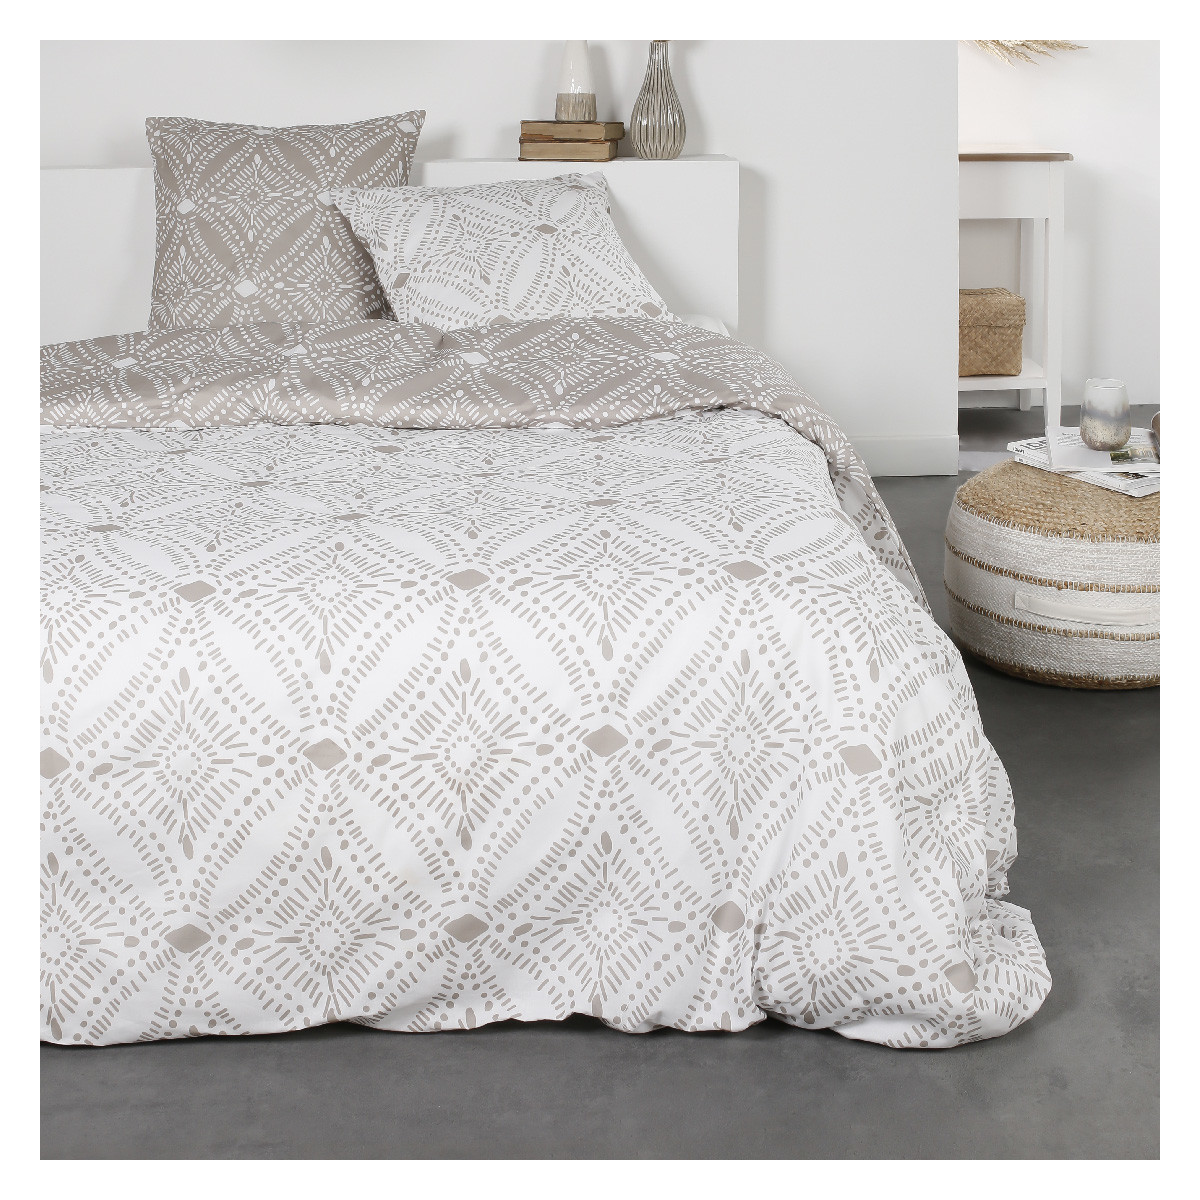 Home Bed linen Today ELODIE White